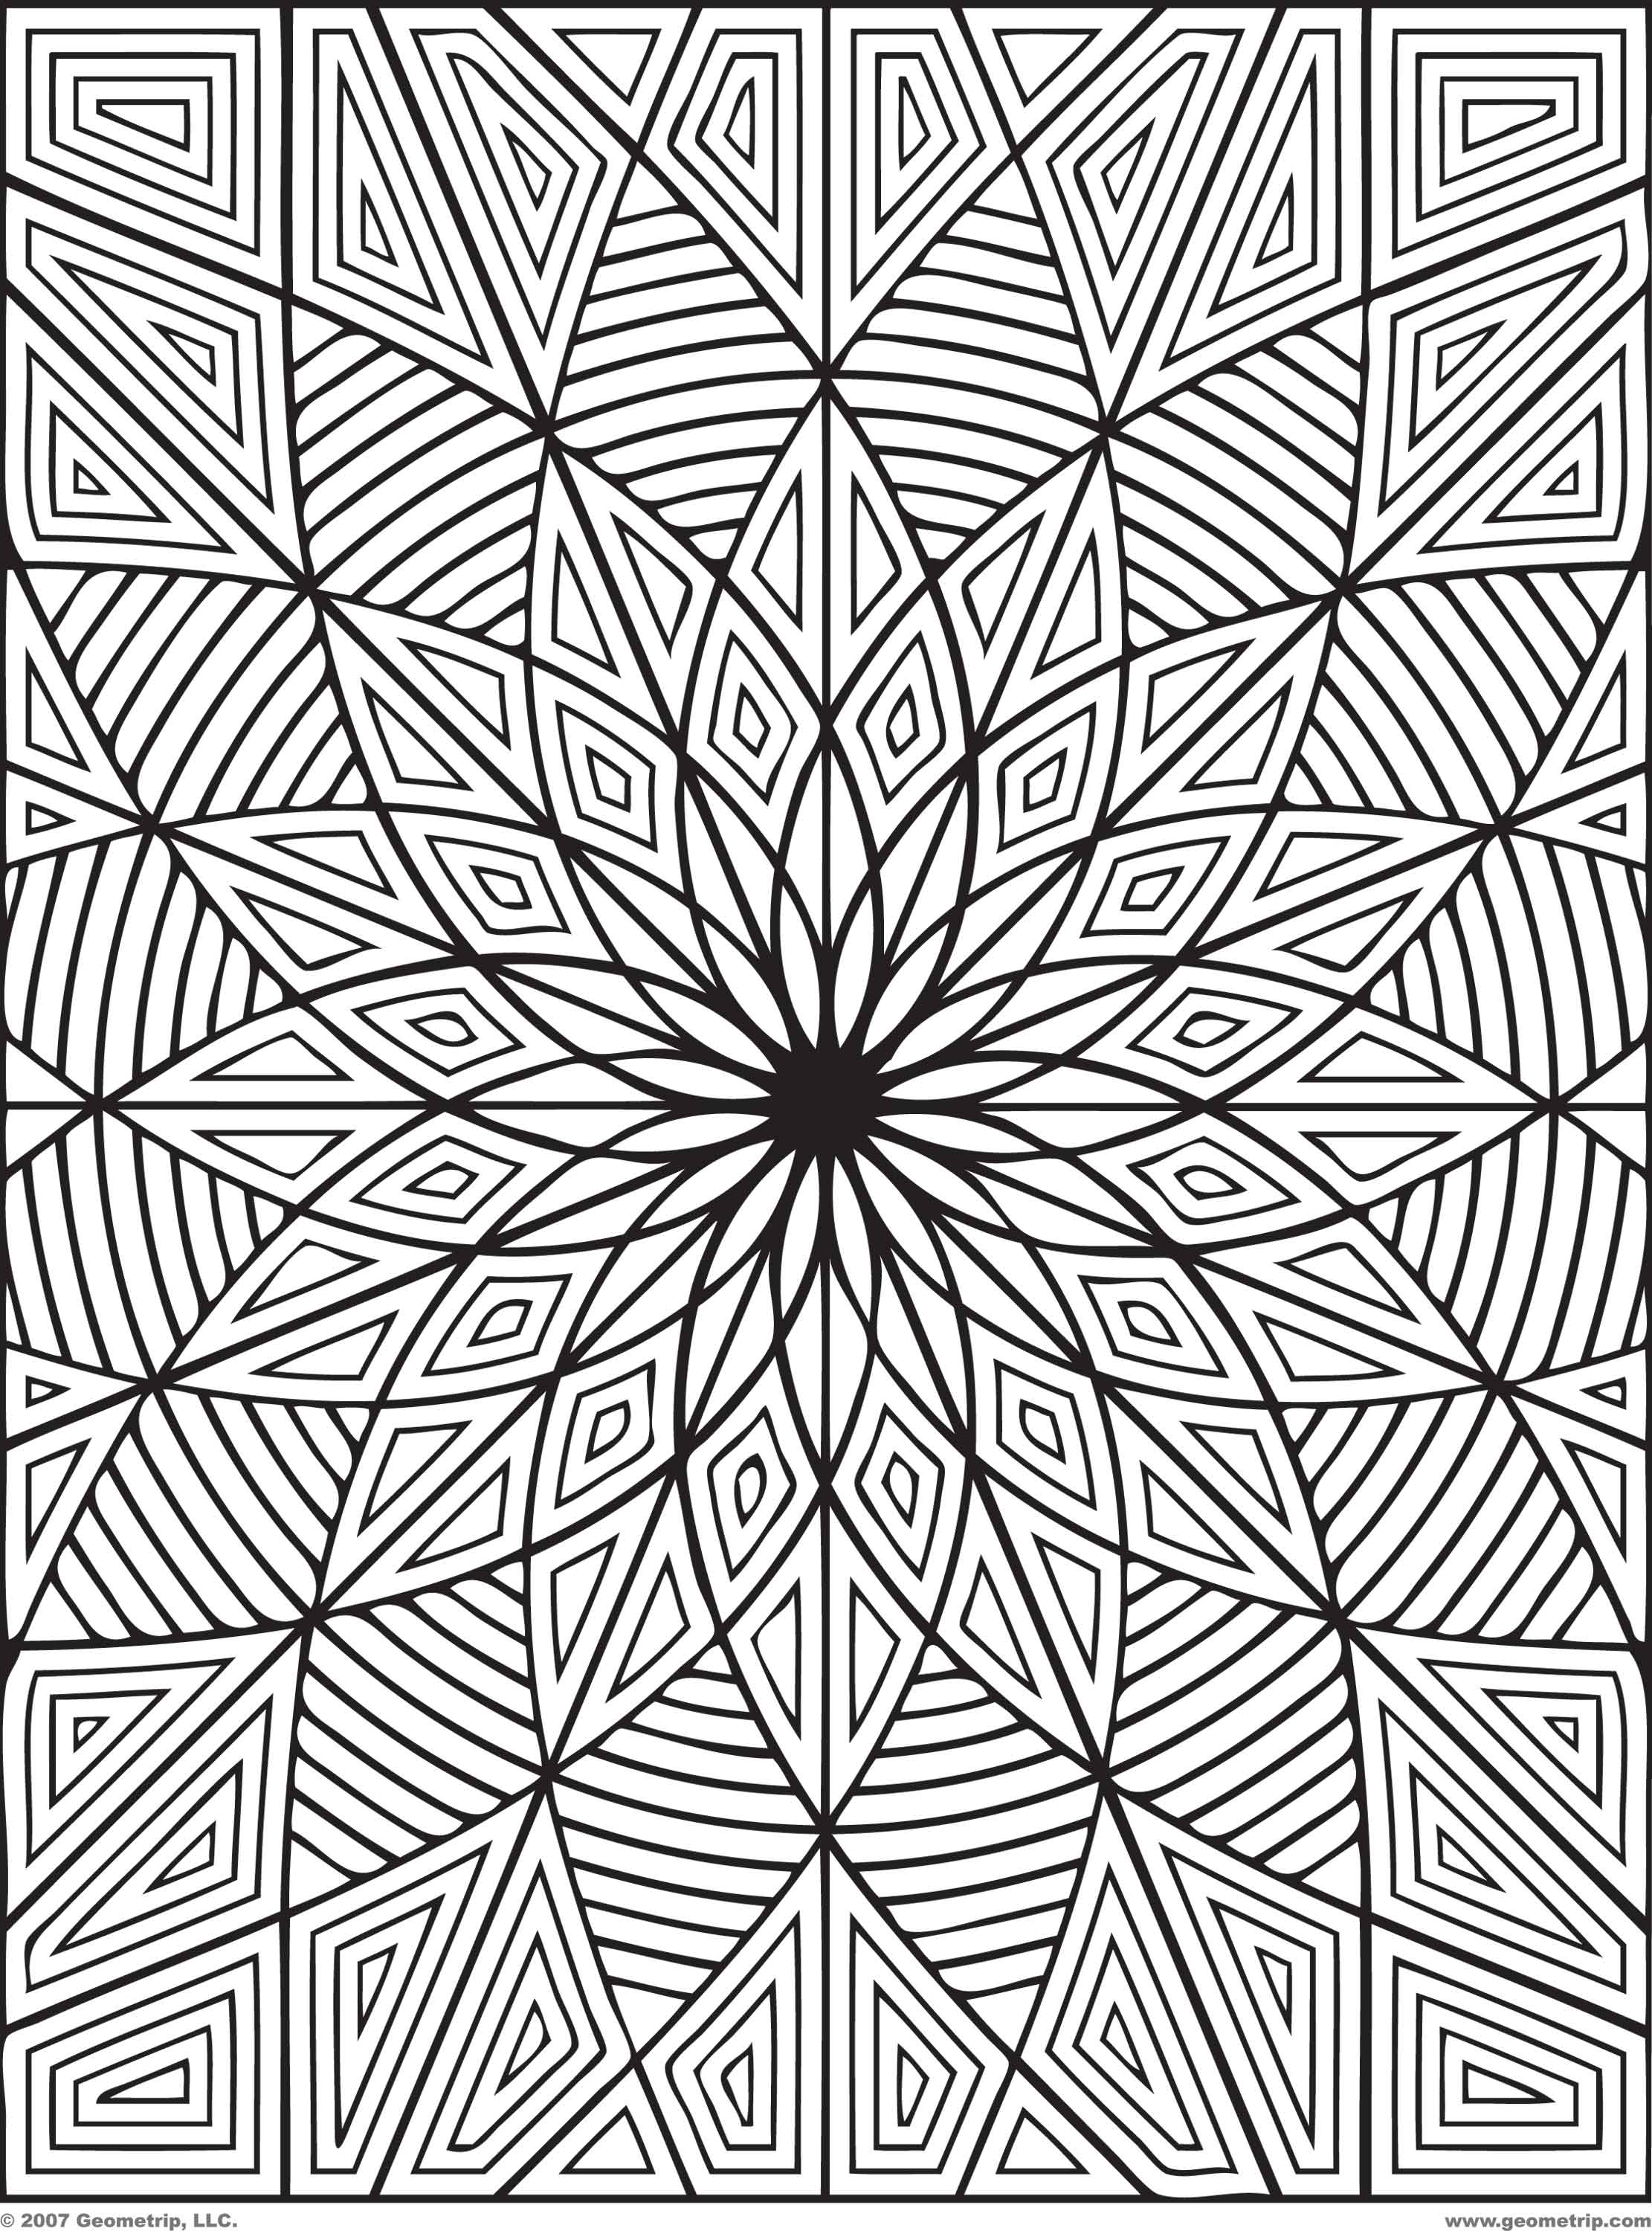 Related Hard Kaleidoscope Coloring Pages item-21598, Hard ...